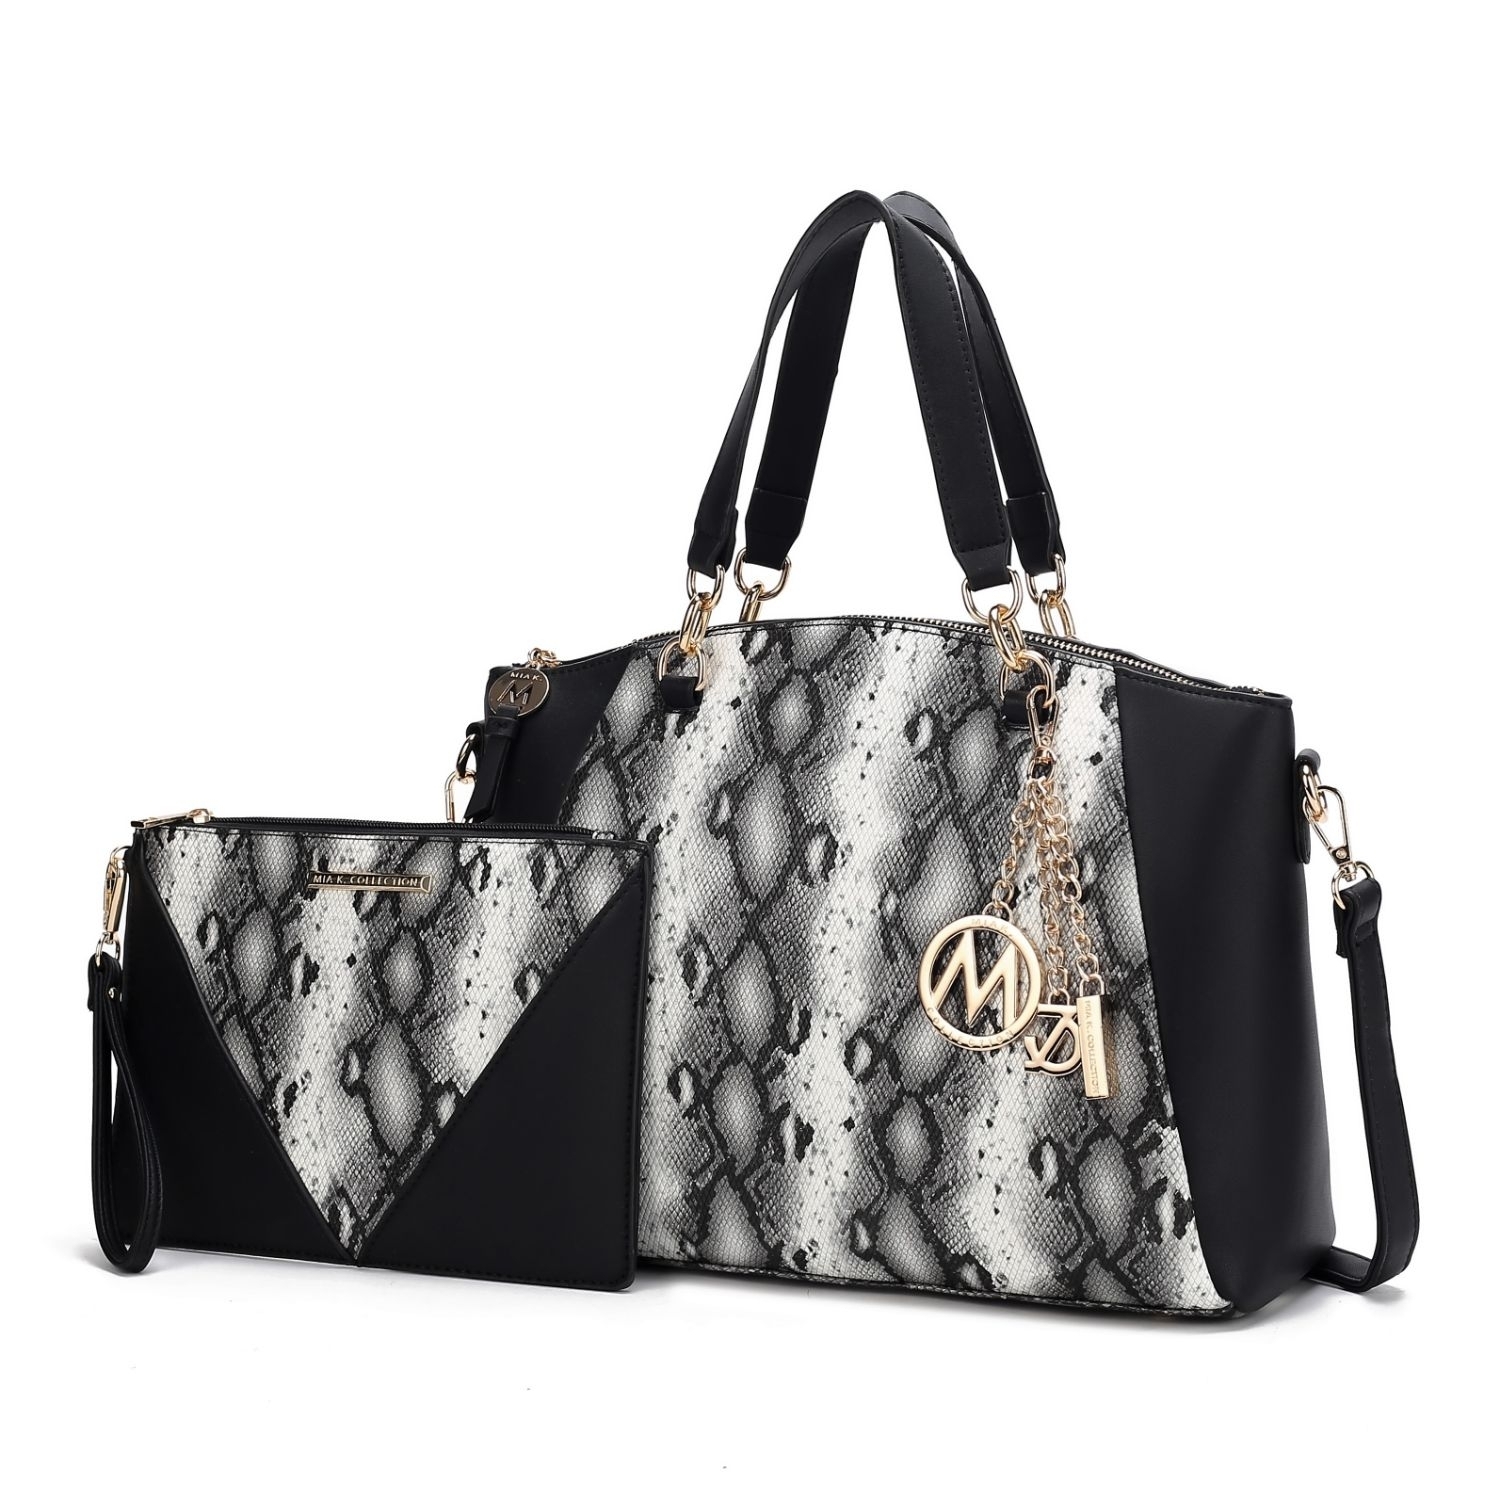 MKF Collection Addison Snake Embossed Vegan Leather Women's Tote Bag With Matching Wristlet By Mia K- 2 Pieces - Black